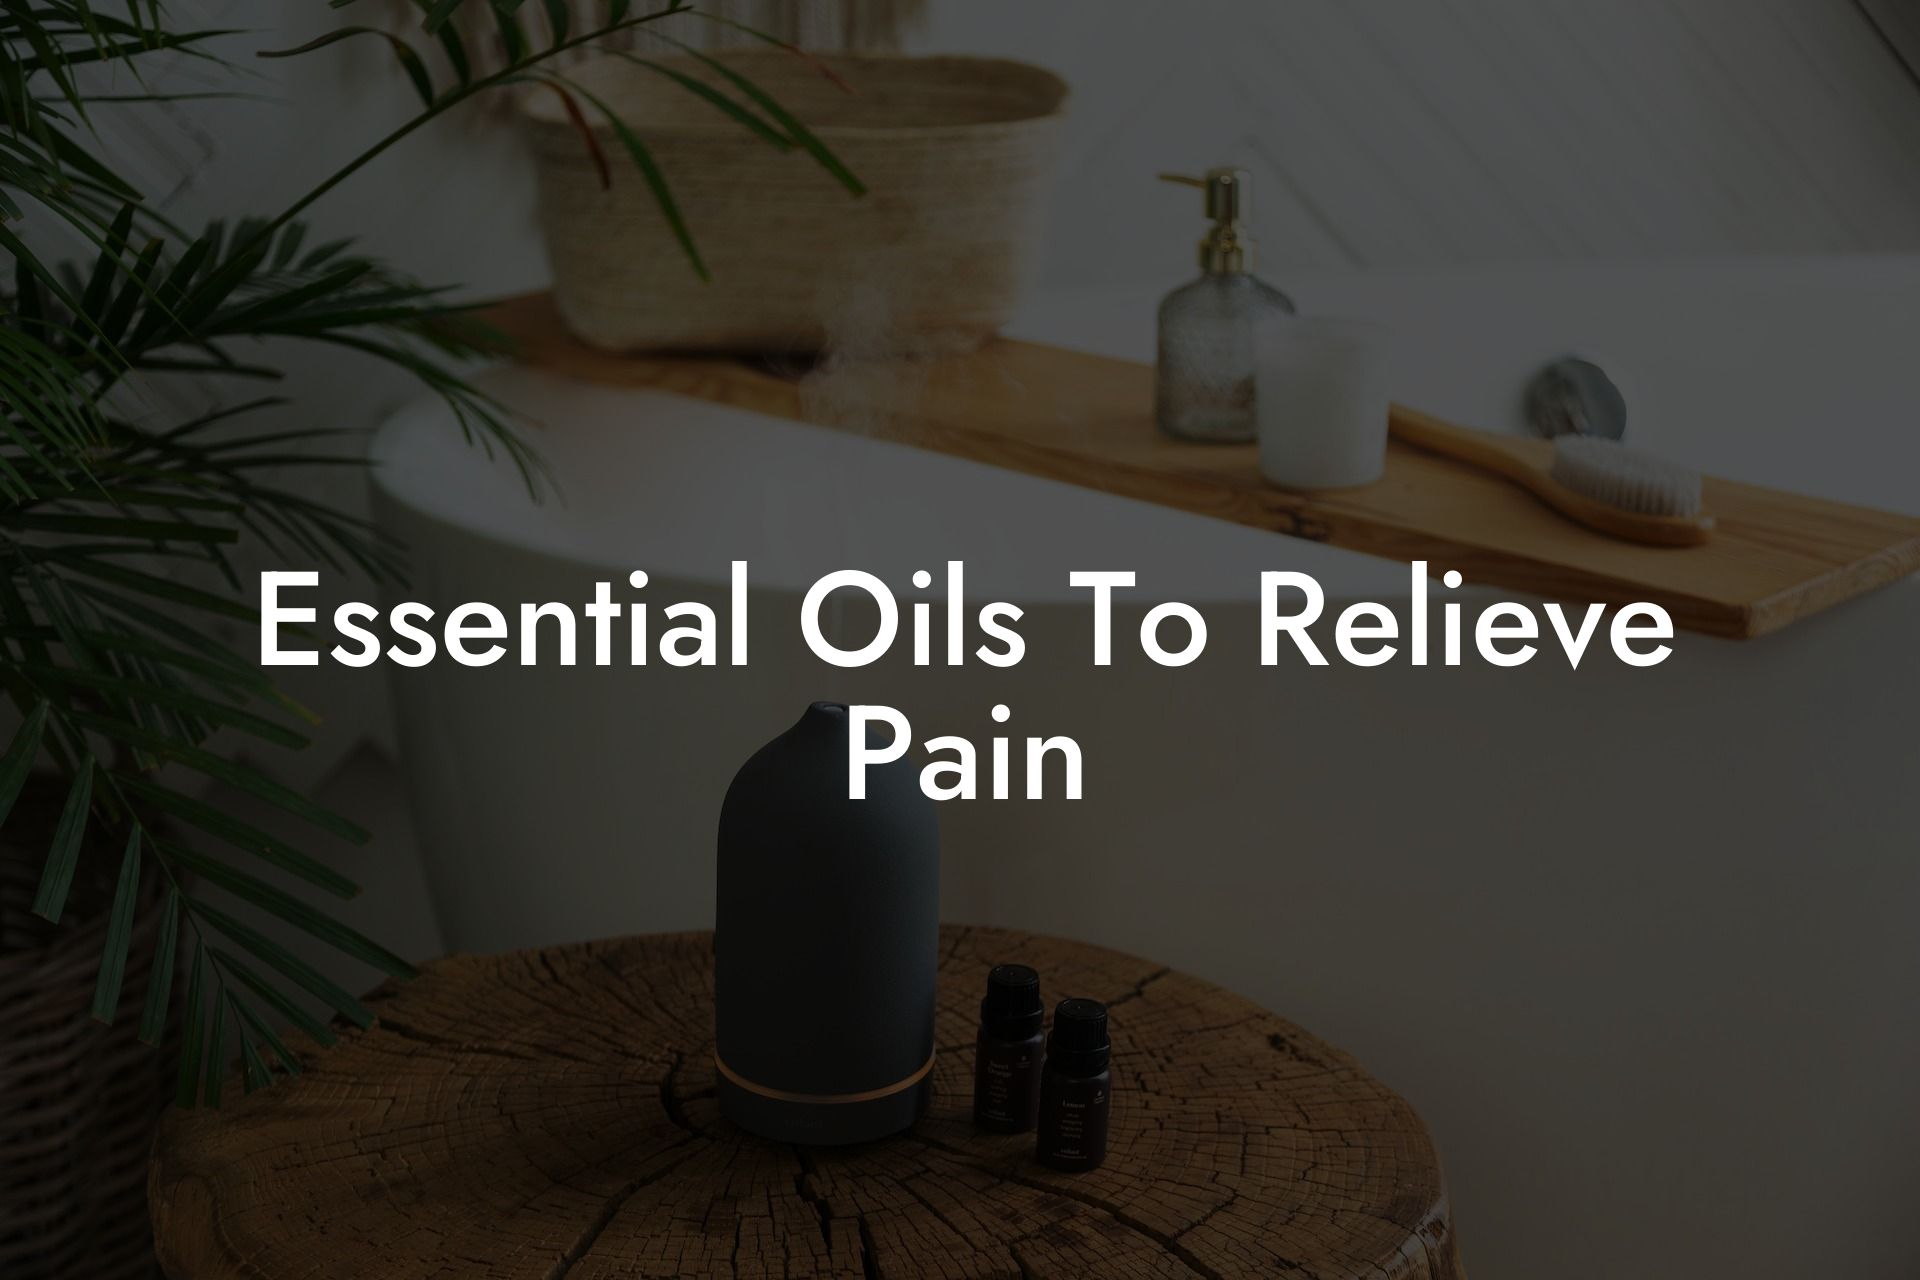 Essential Oils To Relieve Pain